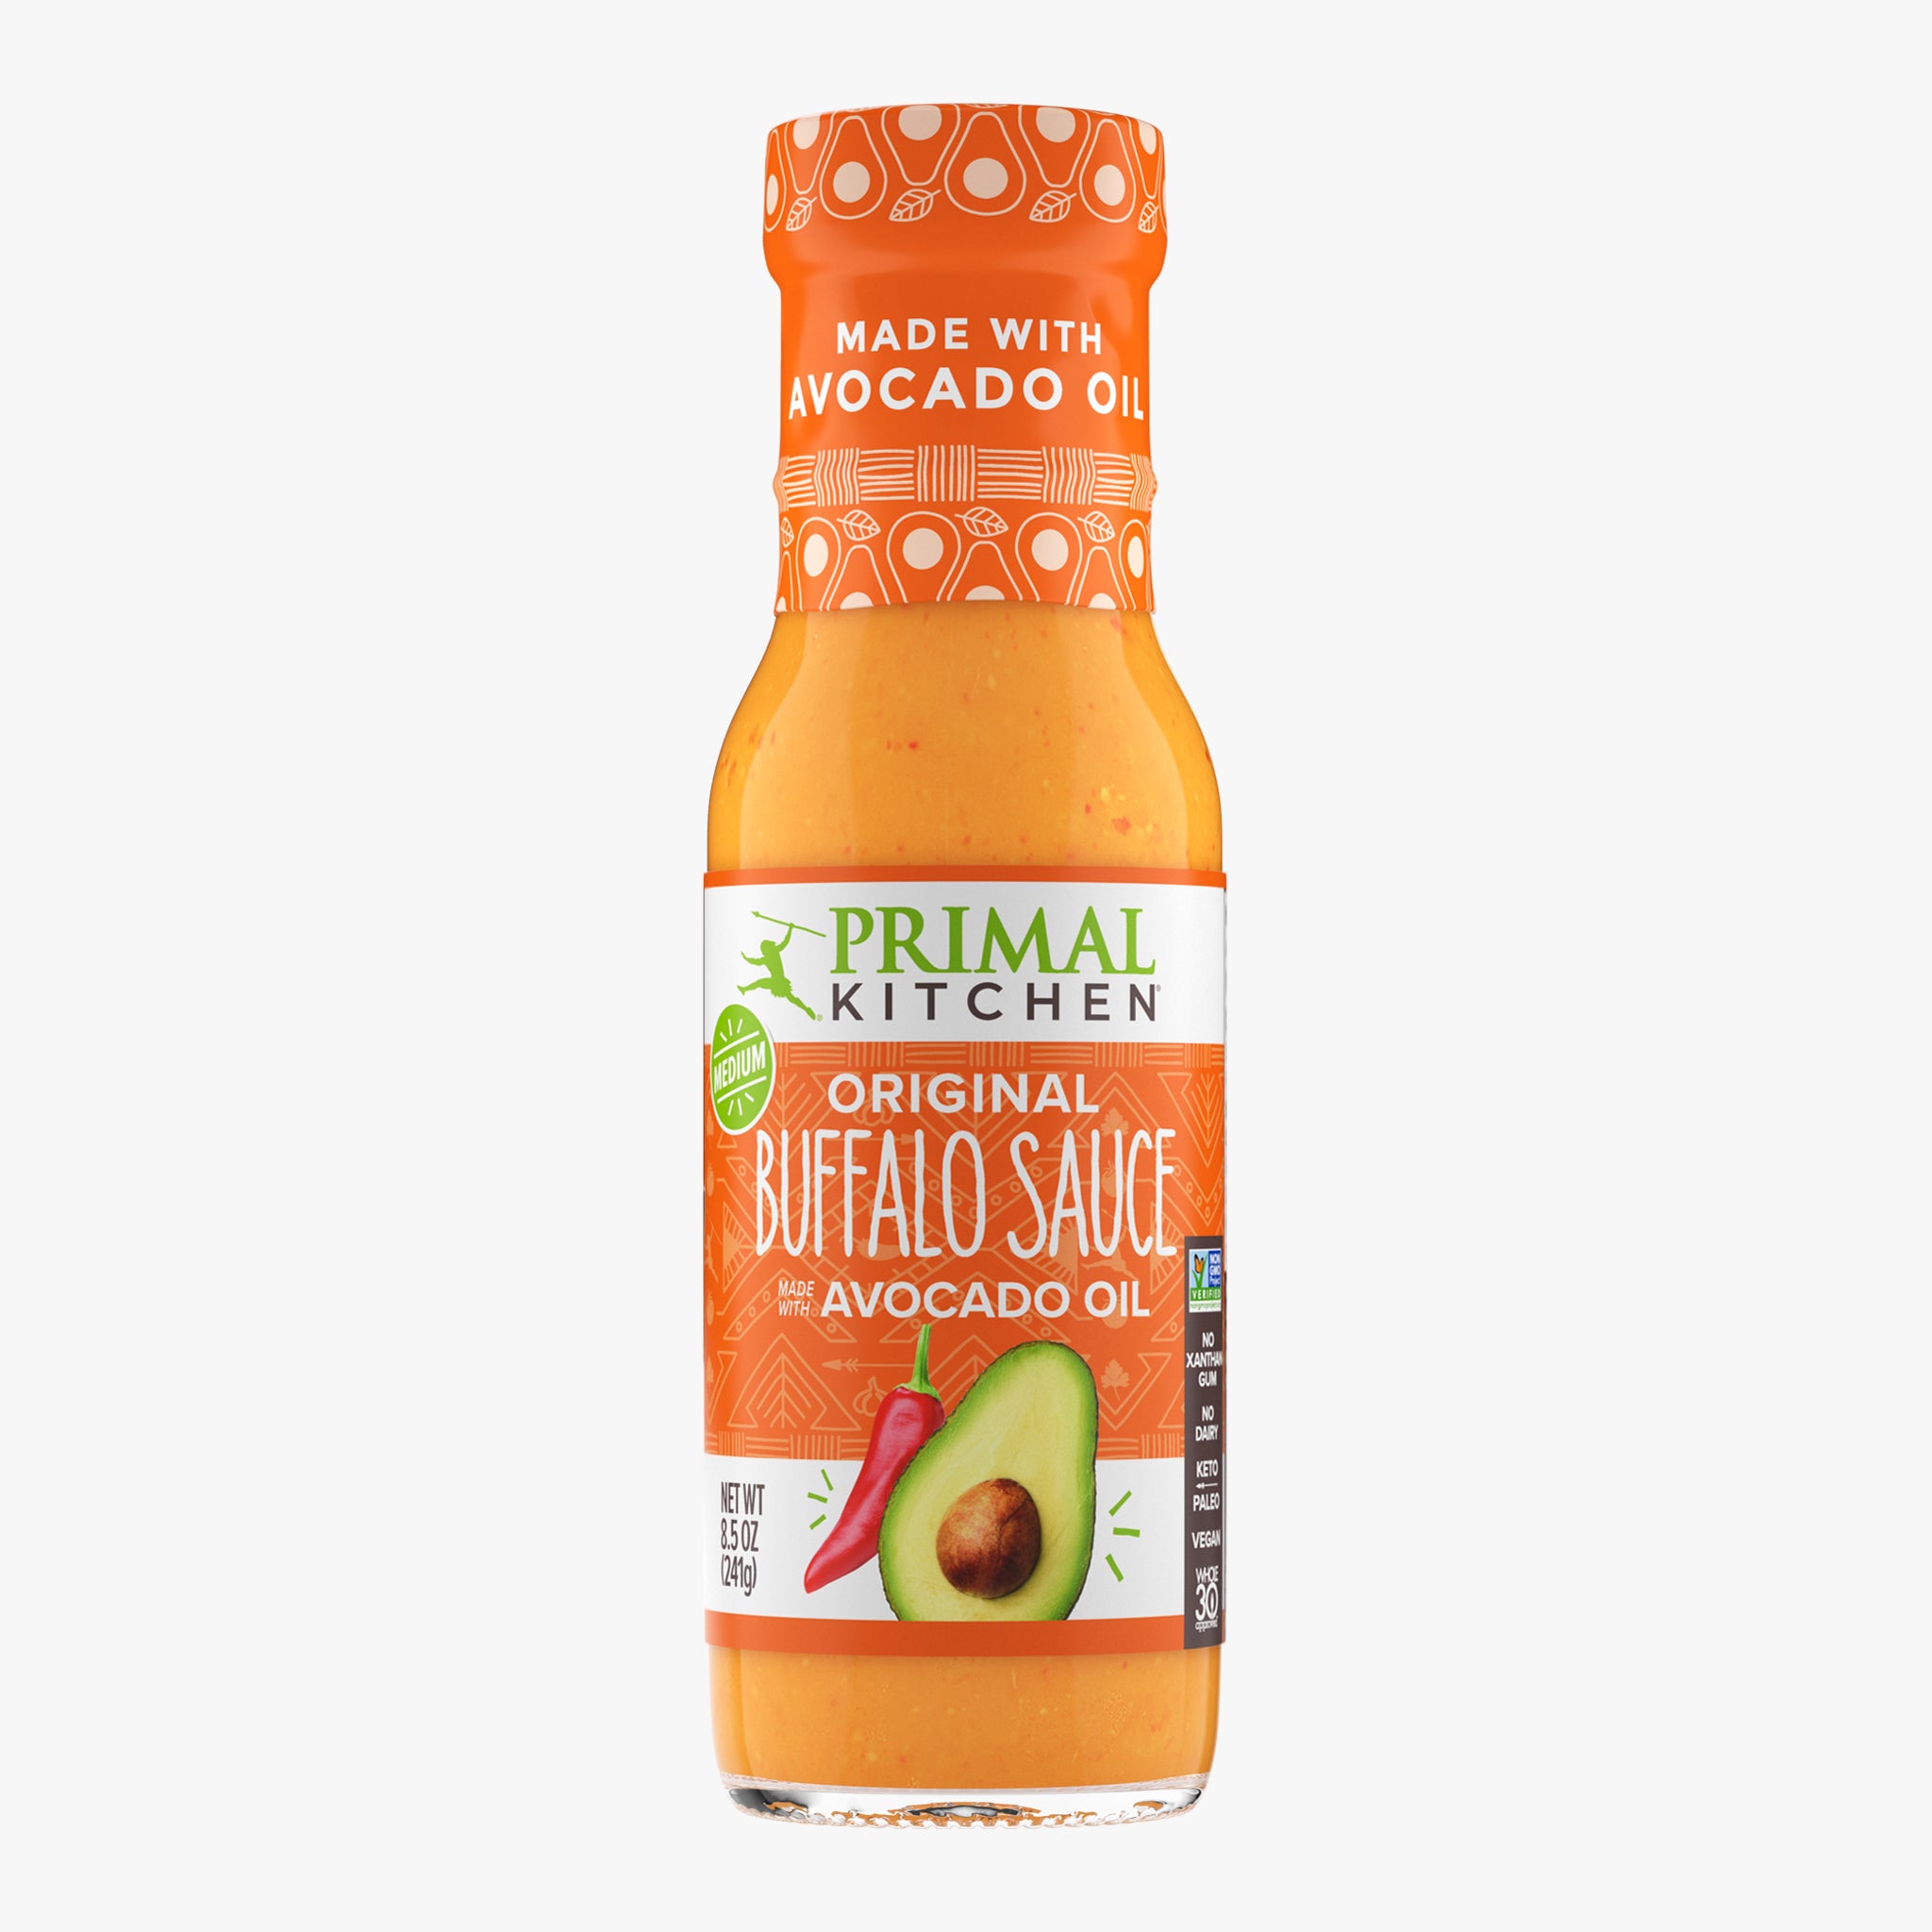 Primal Kitchen Original Buffalo Sauce made with Avocado Oil on a white background